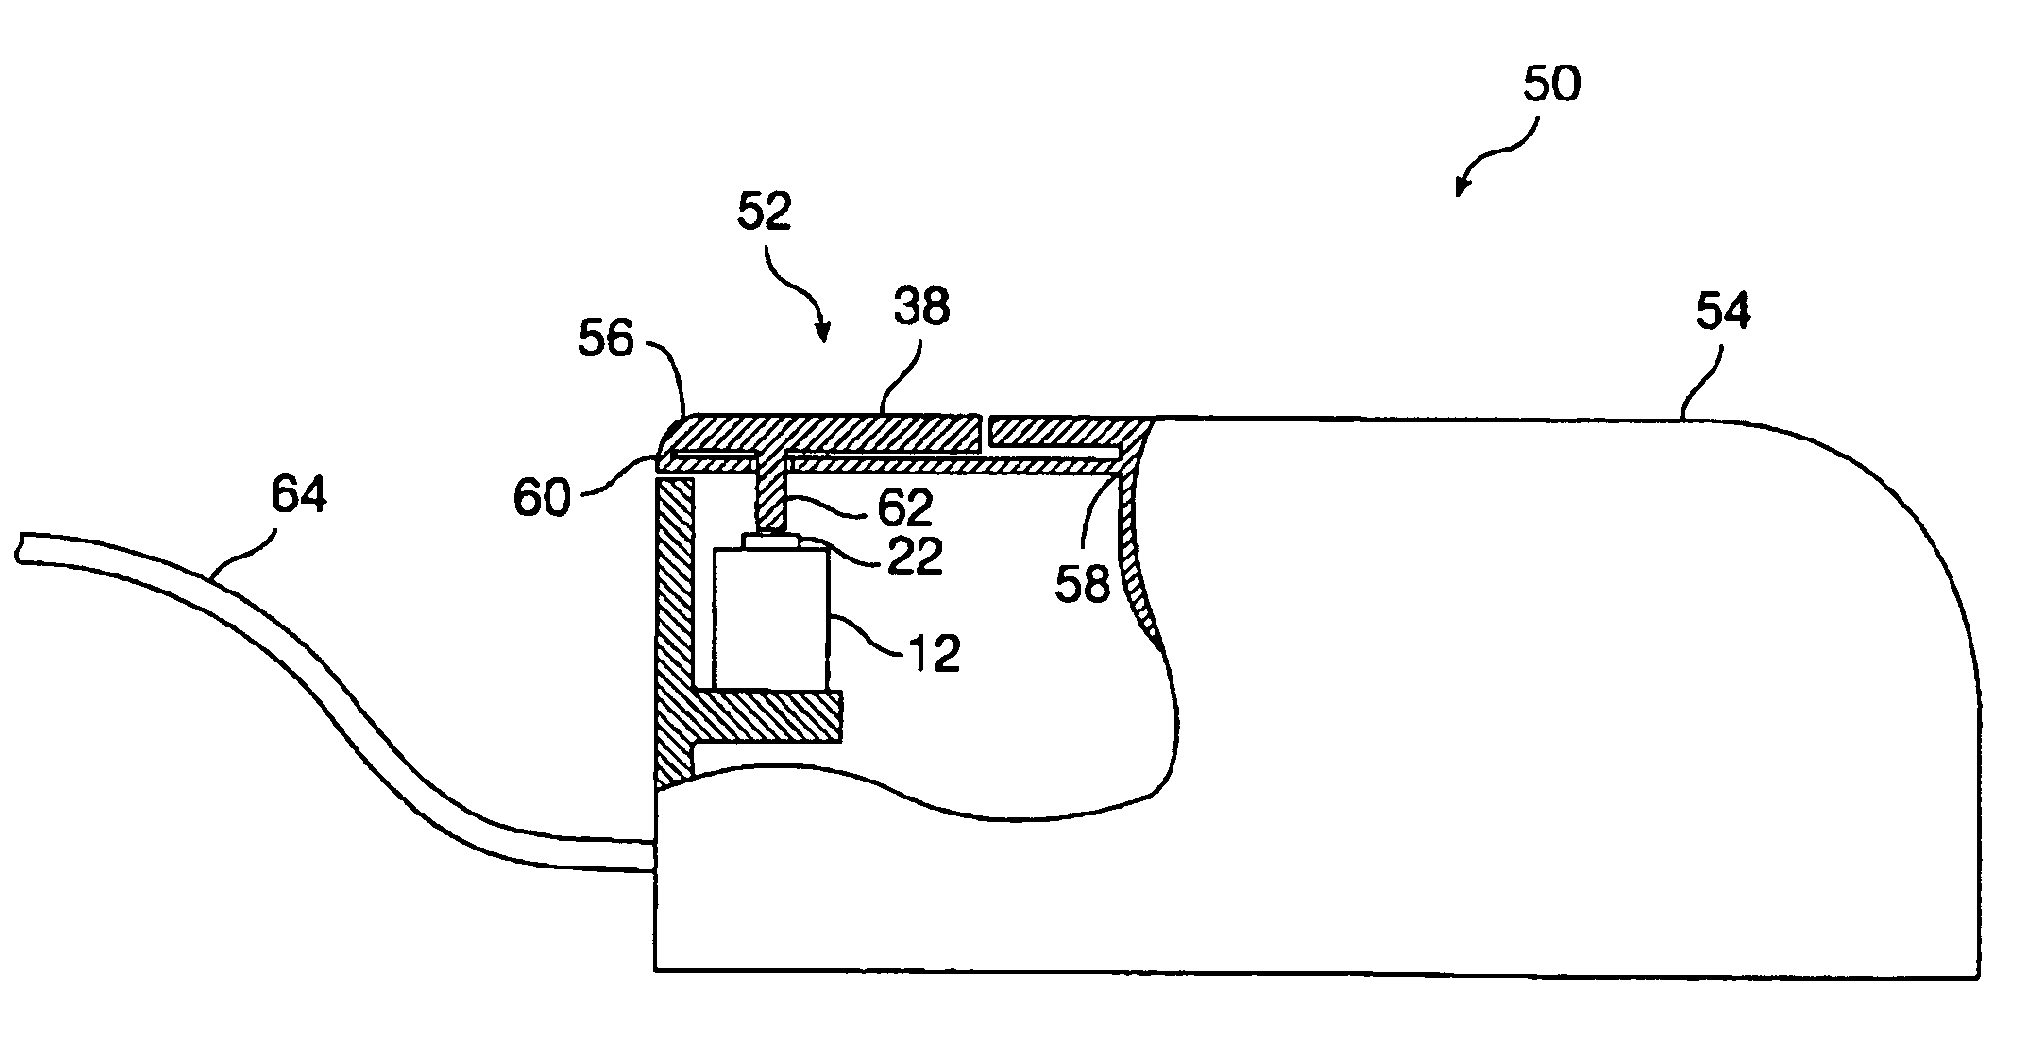 Reverse cantilever assembly for input devices